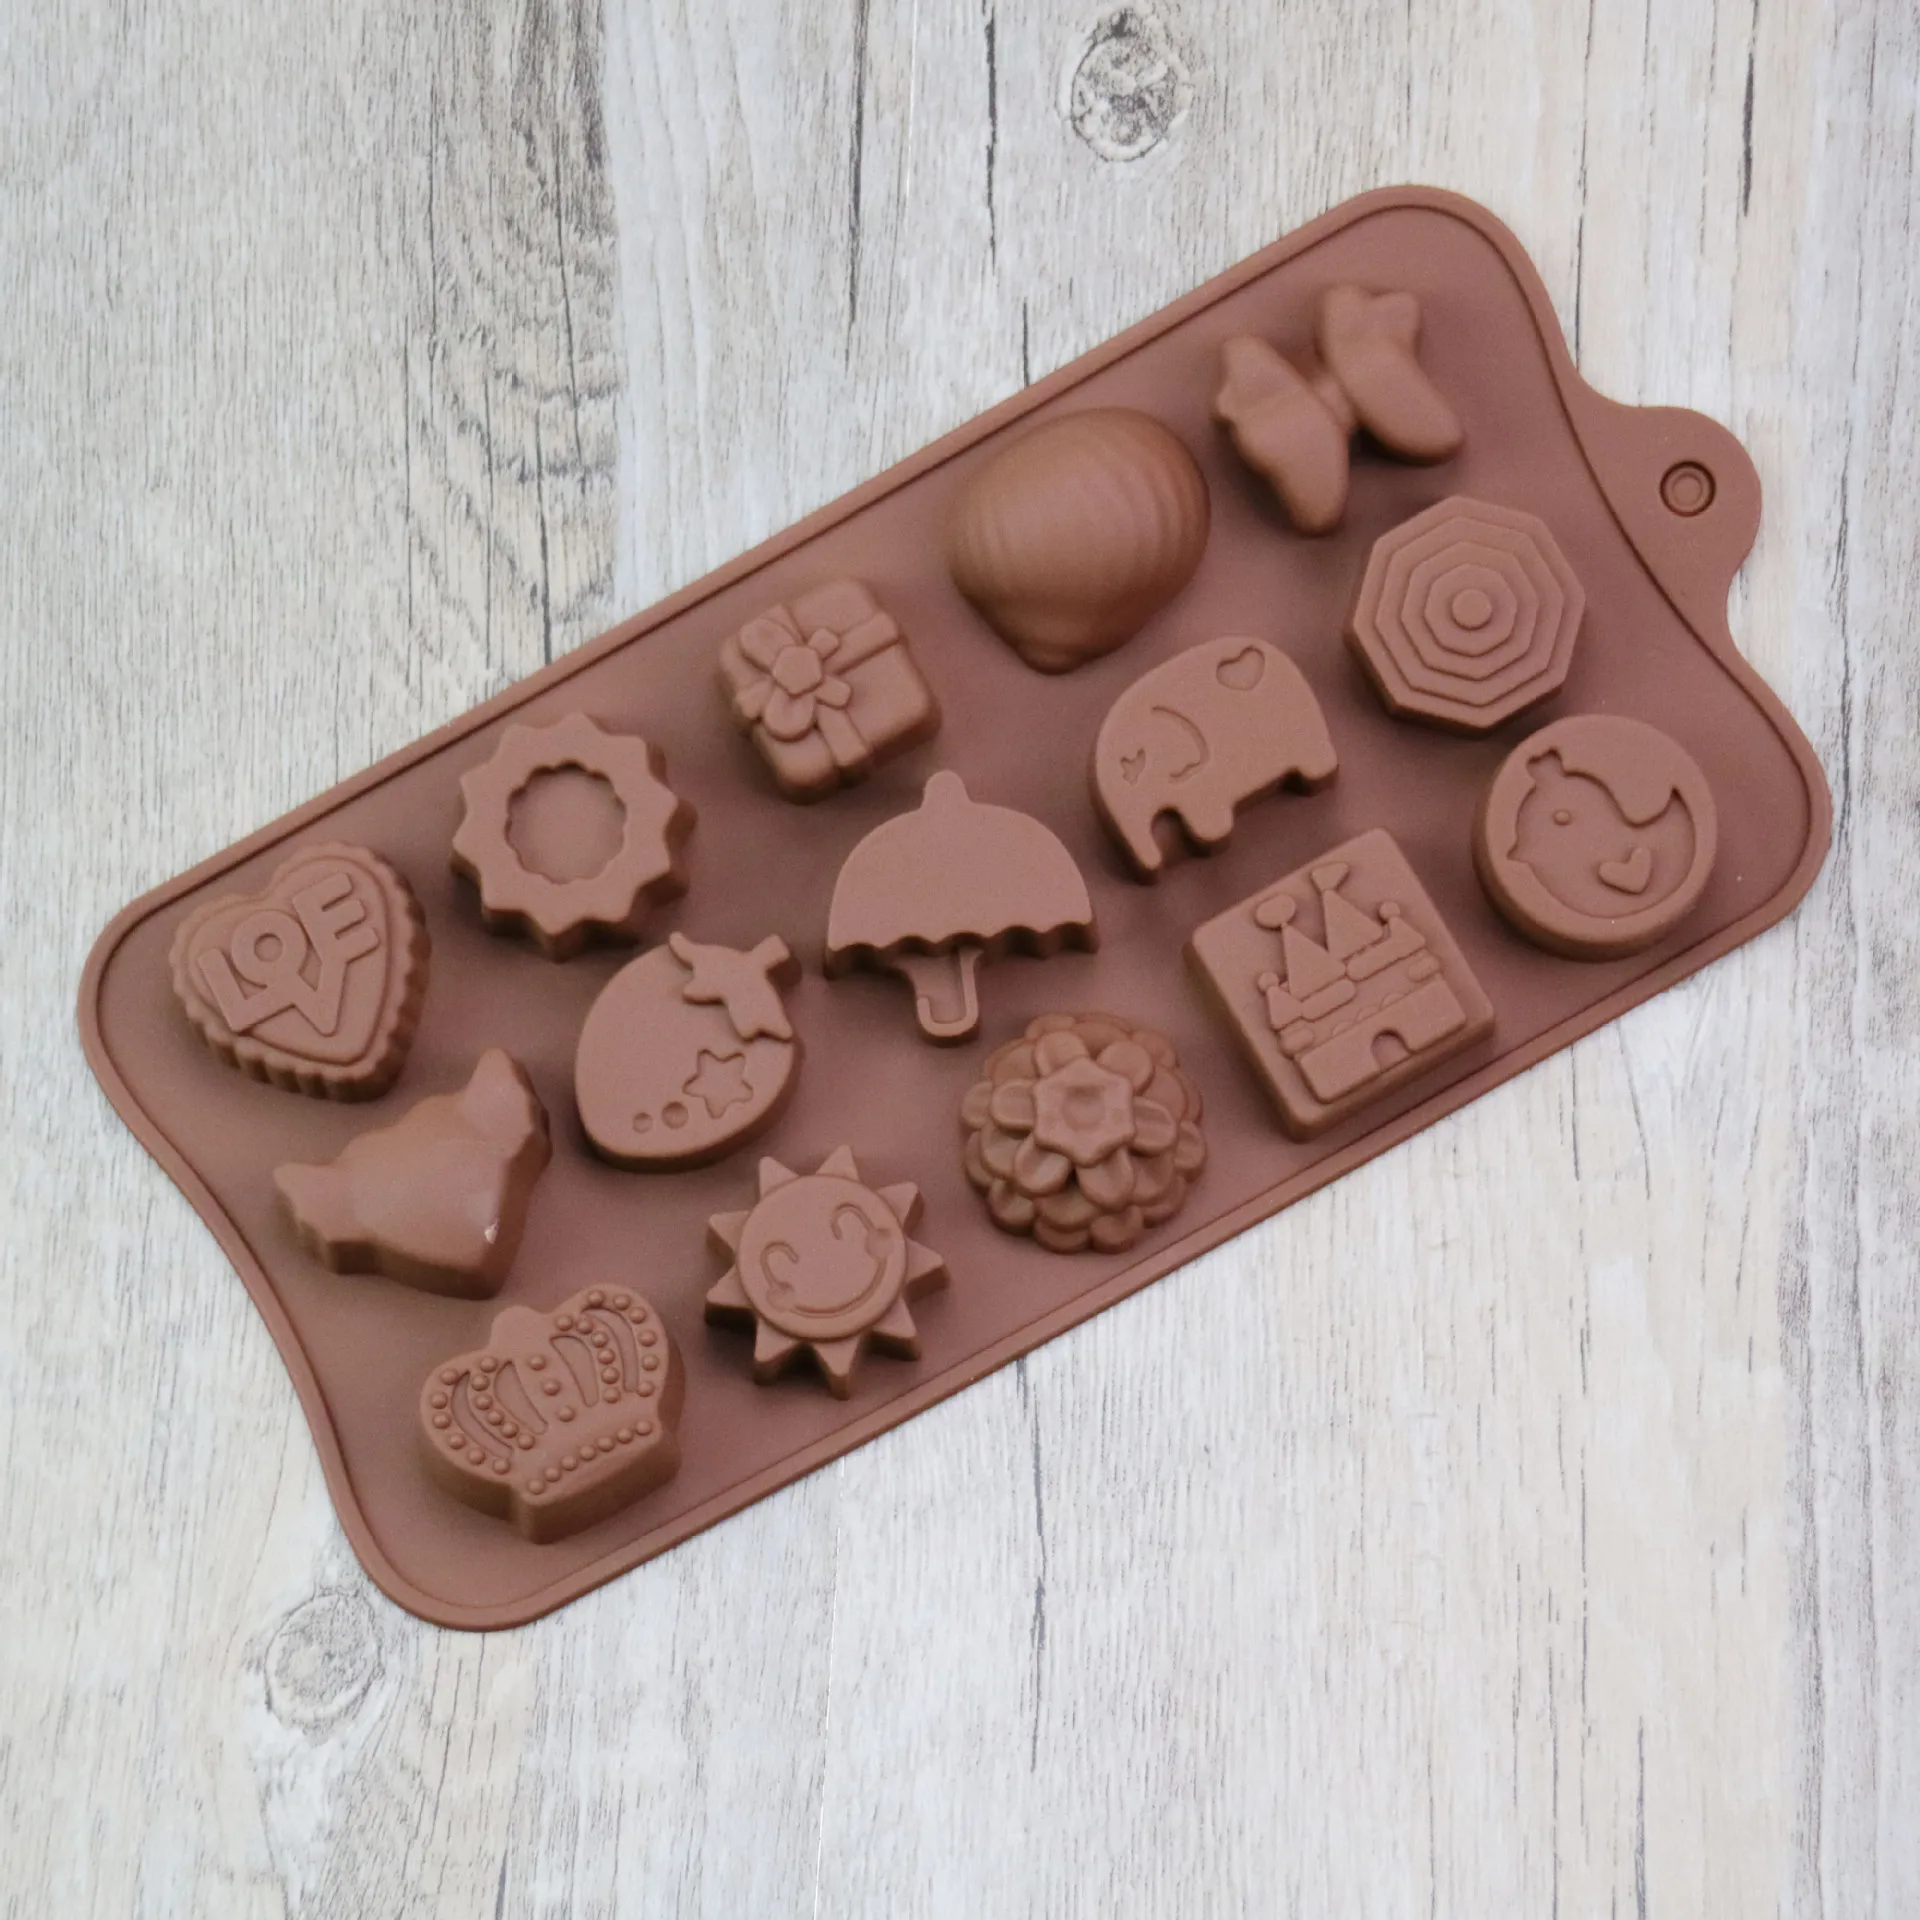 

New Silicone Chocolate Mold 3D Shapes Fun Baking Tools For Jelly Candy Numbers Fruit Cake Kitchen Gadgets DIY Homemade